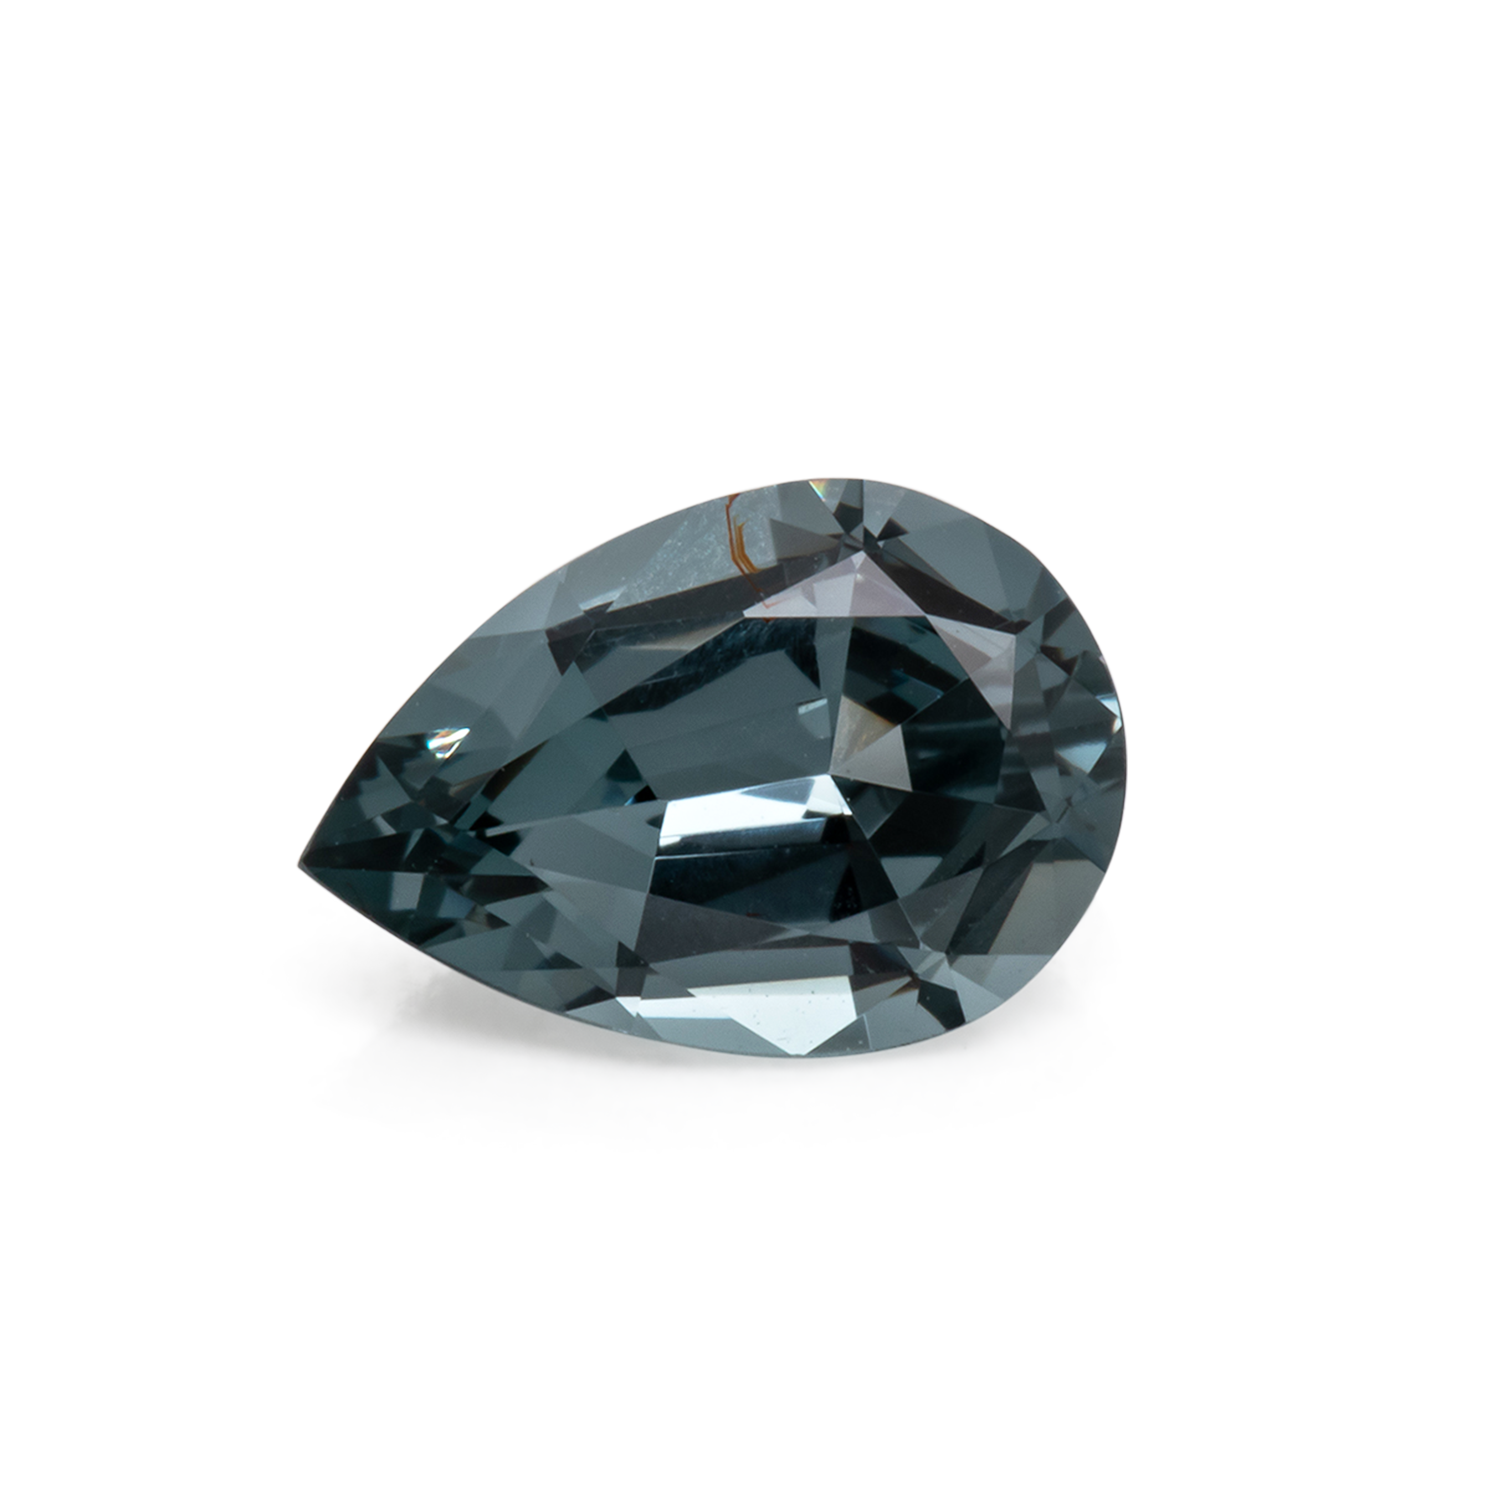 Spinel - grey, pearshape, 9.4x6.5 mm, 1.61 cts, No. SP90045